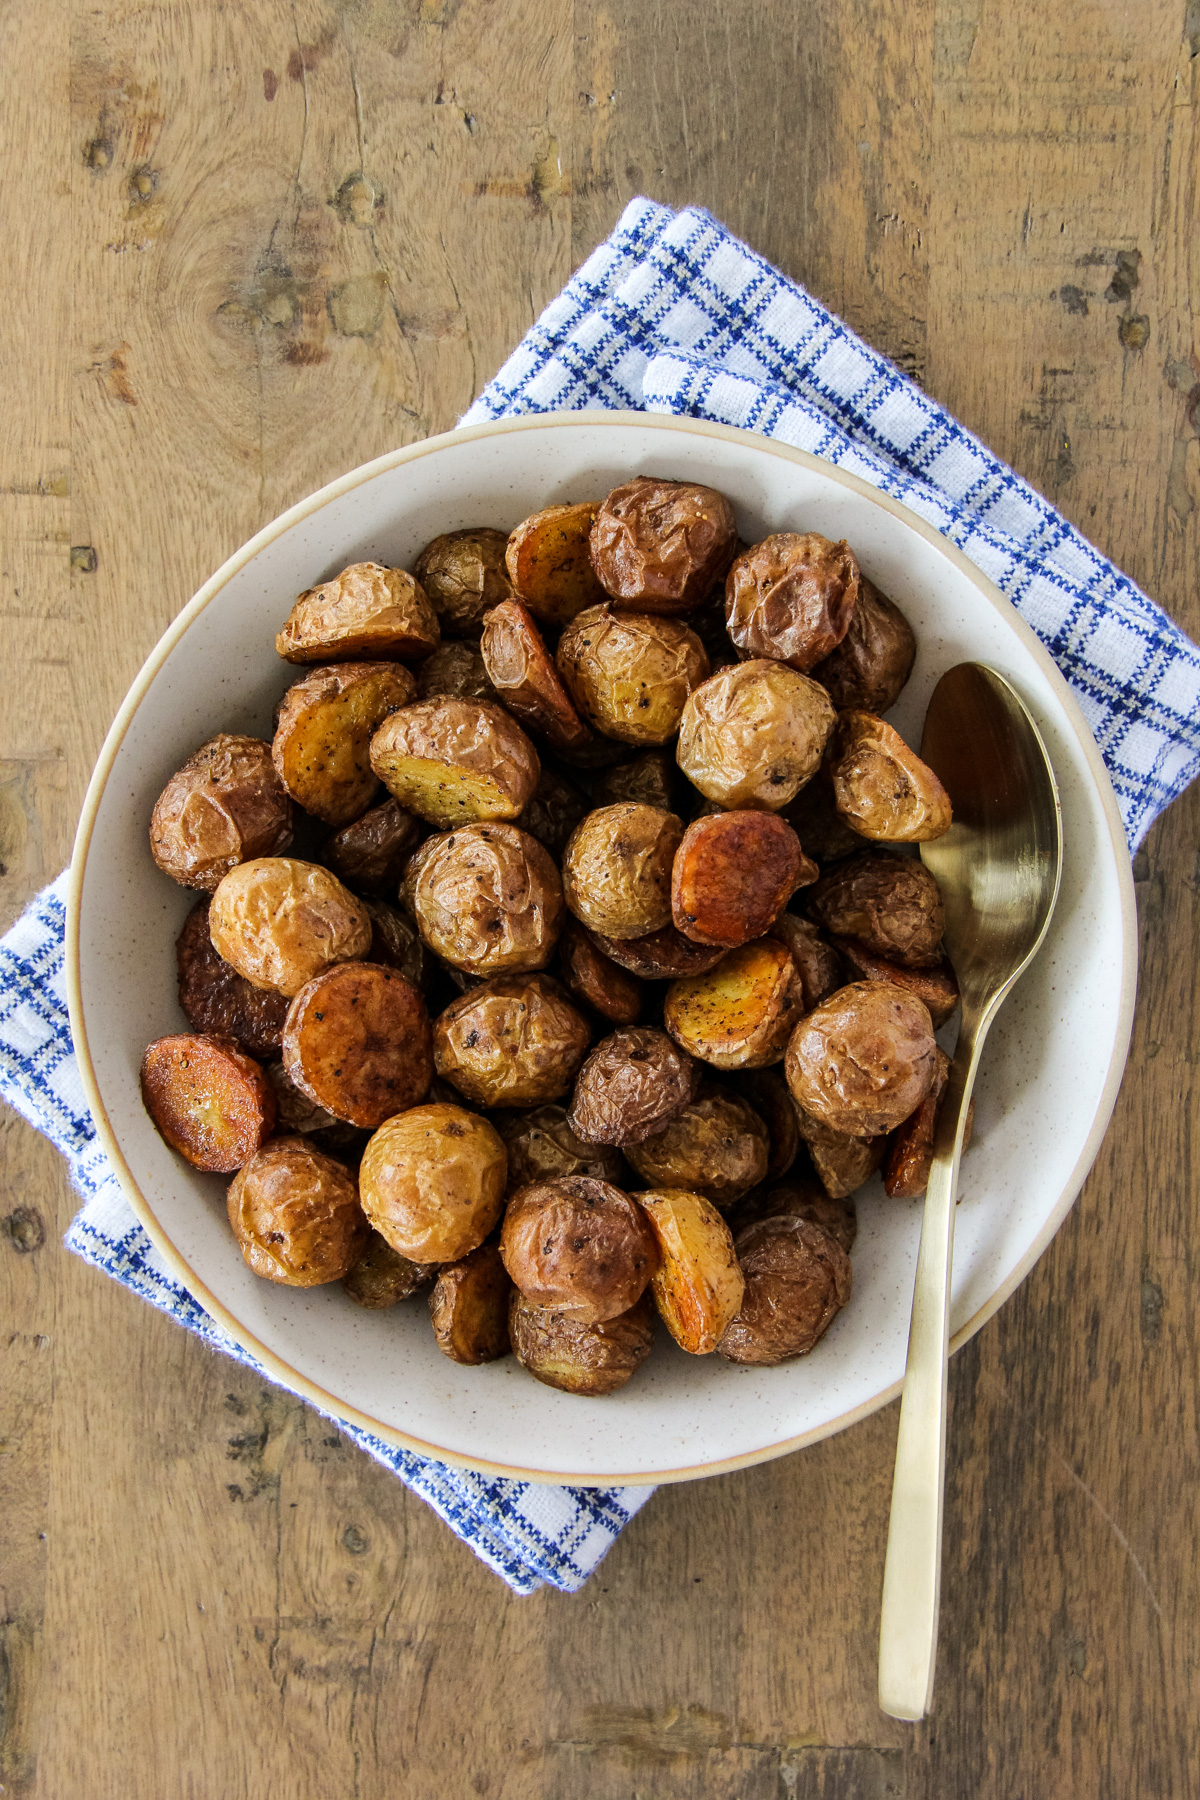 How to Make the Best Oven Roasted Potatoes